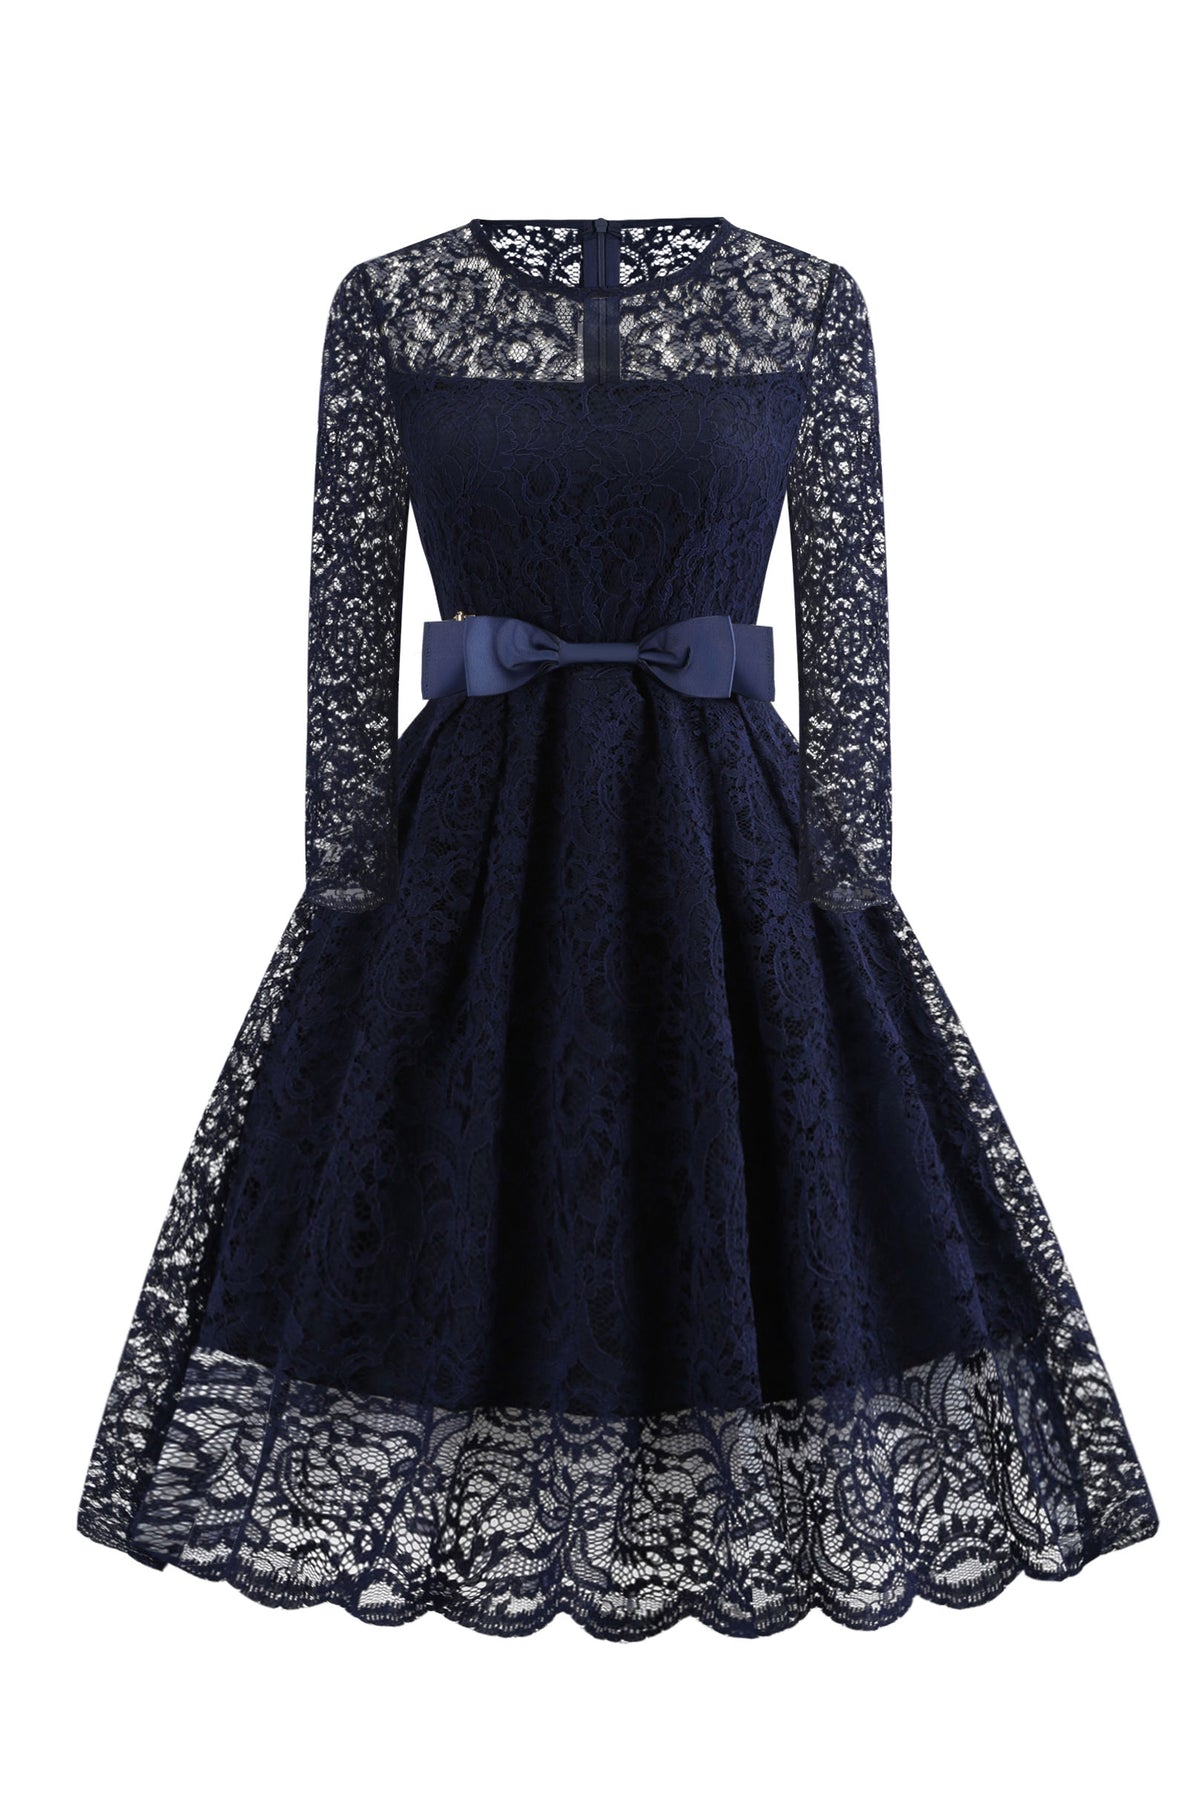 Long Sleeves Lace Navy Cocktail Dress with Ribbon